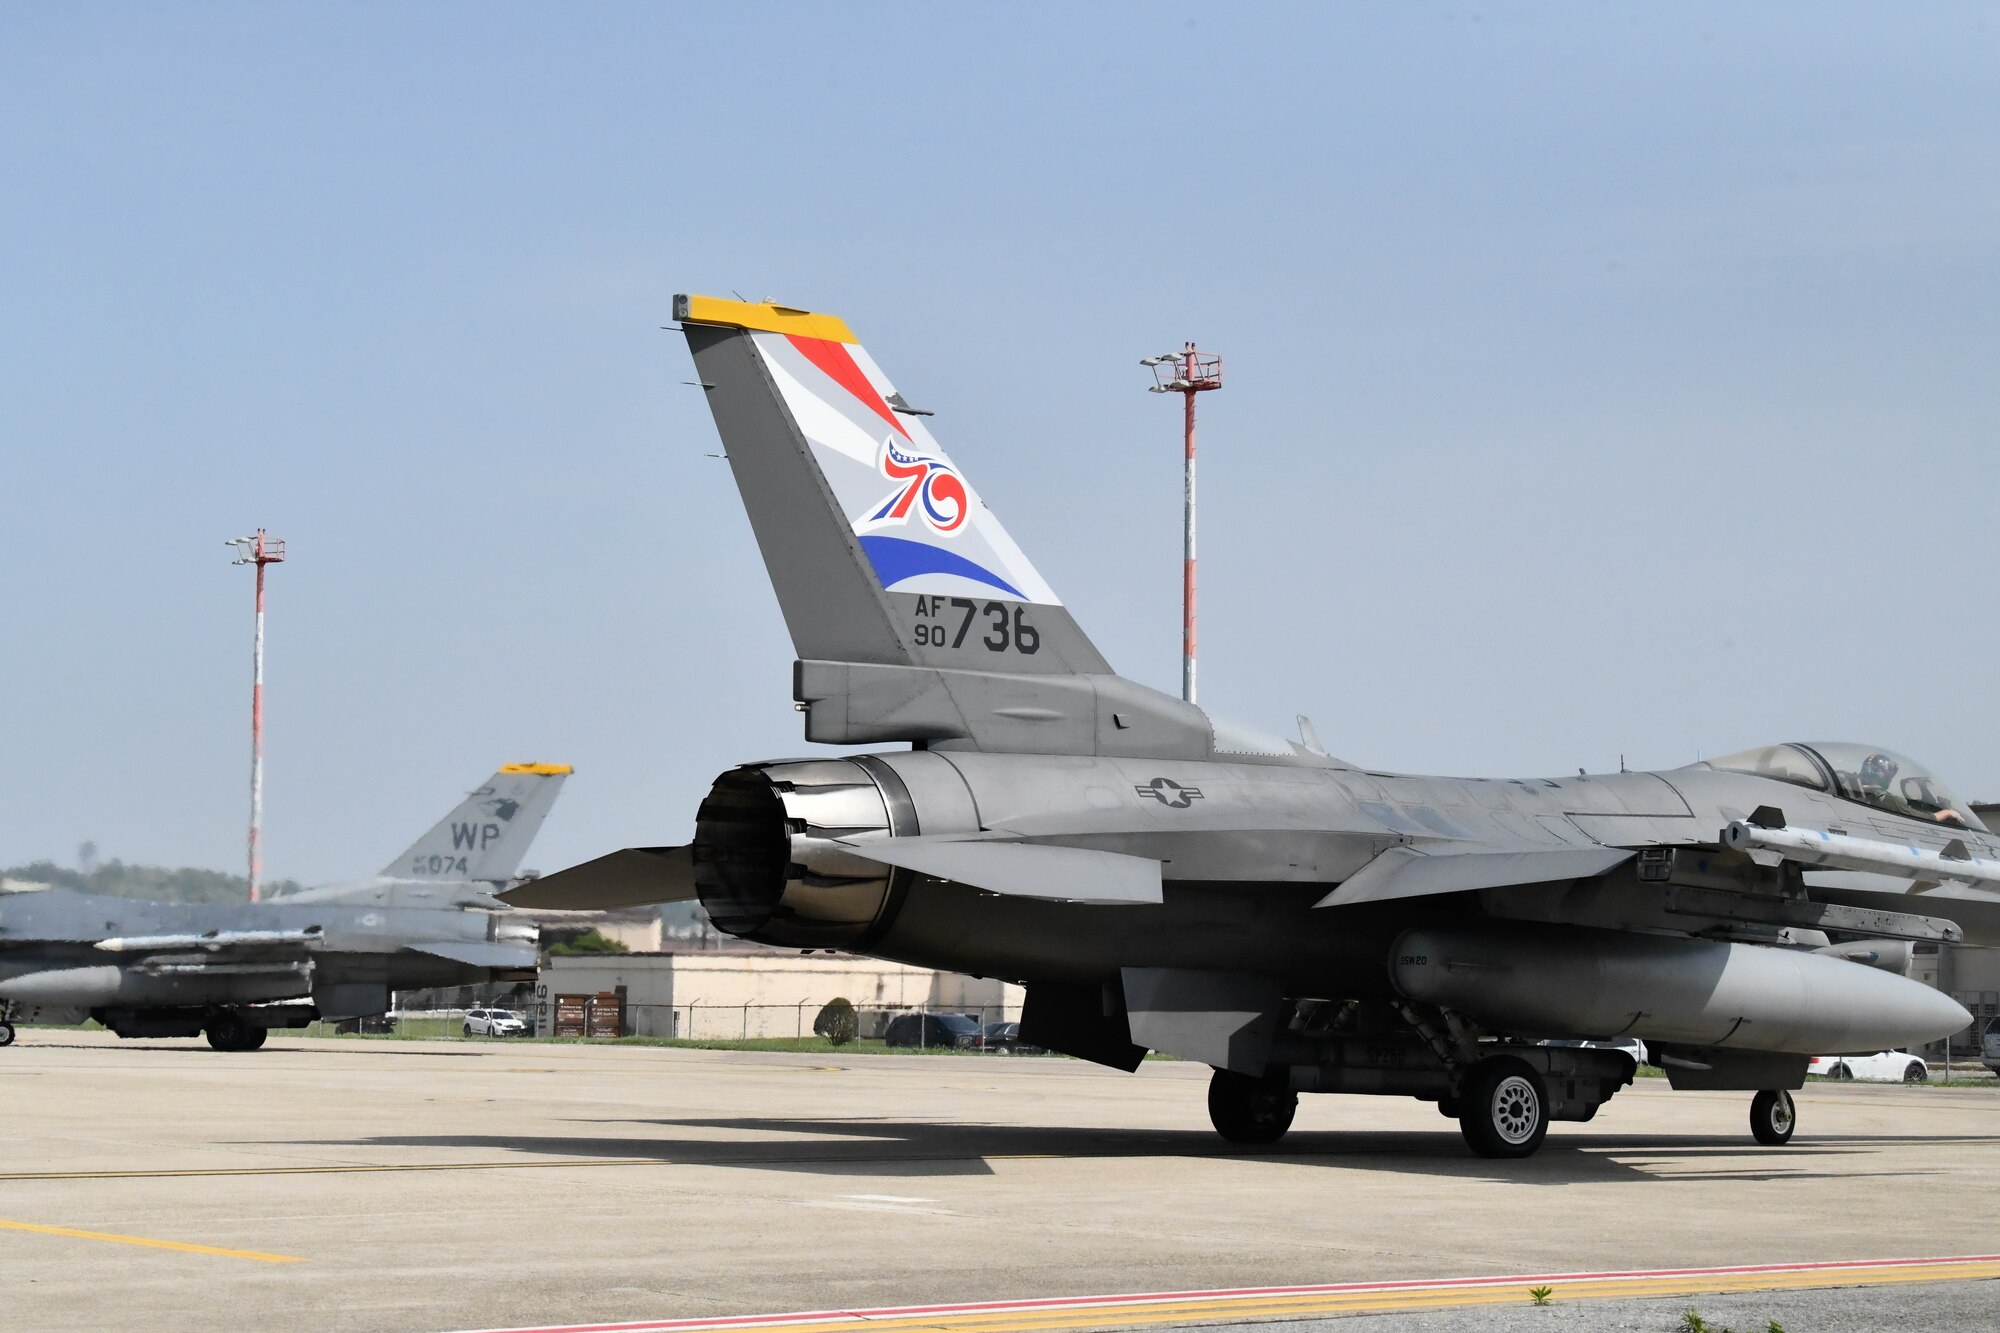 An F-16 Fighting Falcon assigned to the 8th Fighter Wing, Kunsan Air Base, Republic of Korea, taxis to the runway with a U.S.-ROK Alliance 70th Anniversary tail flash at Osan AB, ROK, May 7, 2023. The U.S.-ROK Alliance continues to work towards shared goals of securing peace, stability and prosperity on the Korean Peninsula and throughout the Indo-Pacific region. (U.S. Air Force photo by Senior Airman Karla Parra)